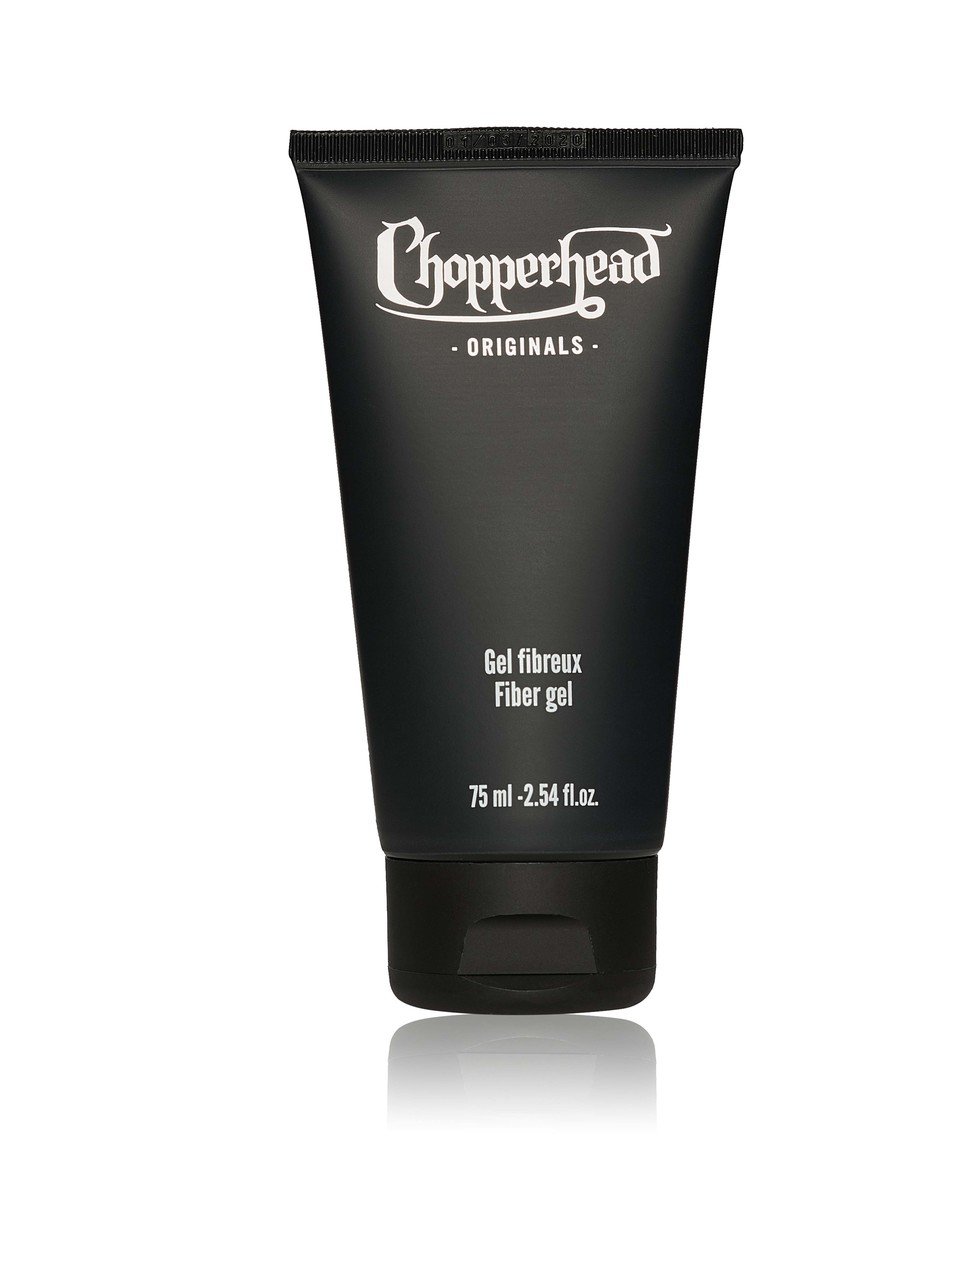 Fiber Gel - Men's Hair Care Products for Masculine Style | Chopperhead